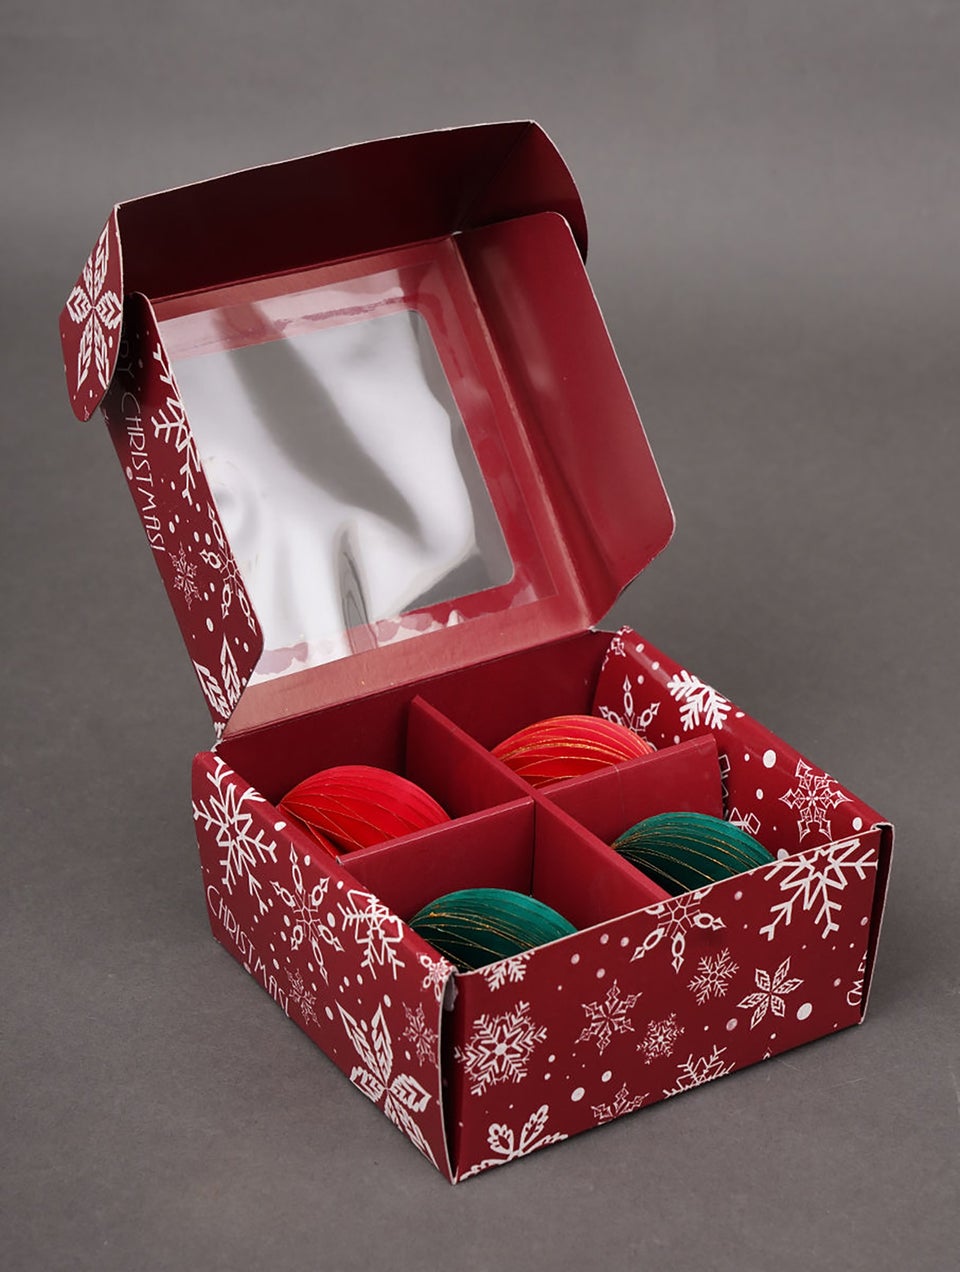 Handcrafted Paper Christmas Ornaments In A Gift Box